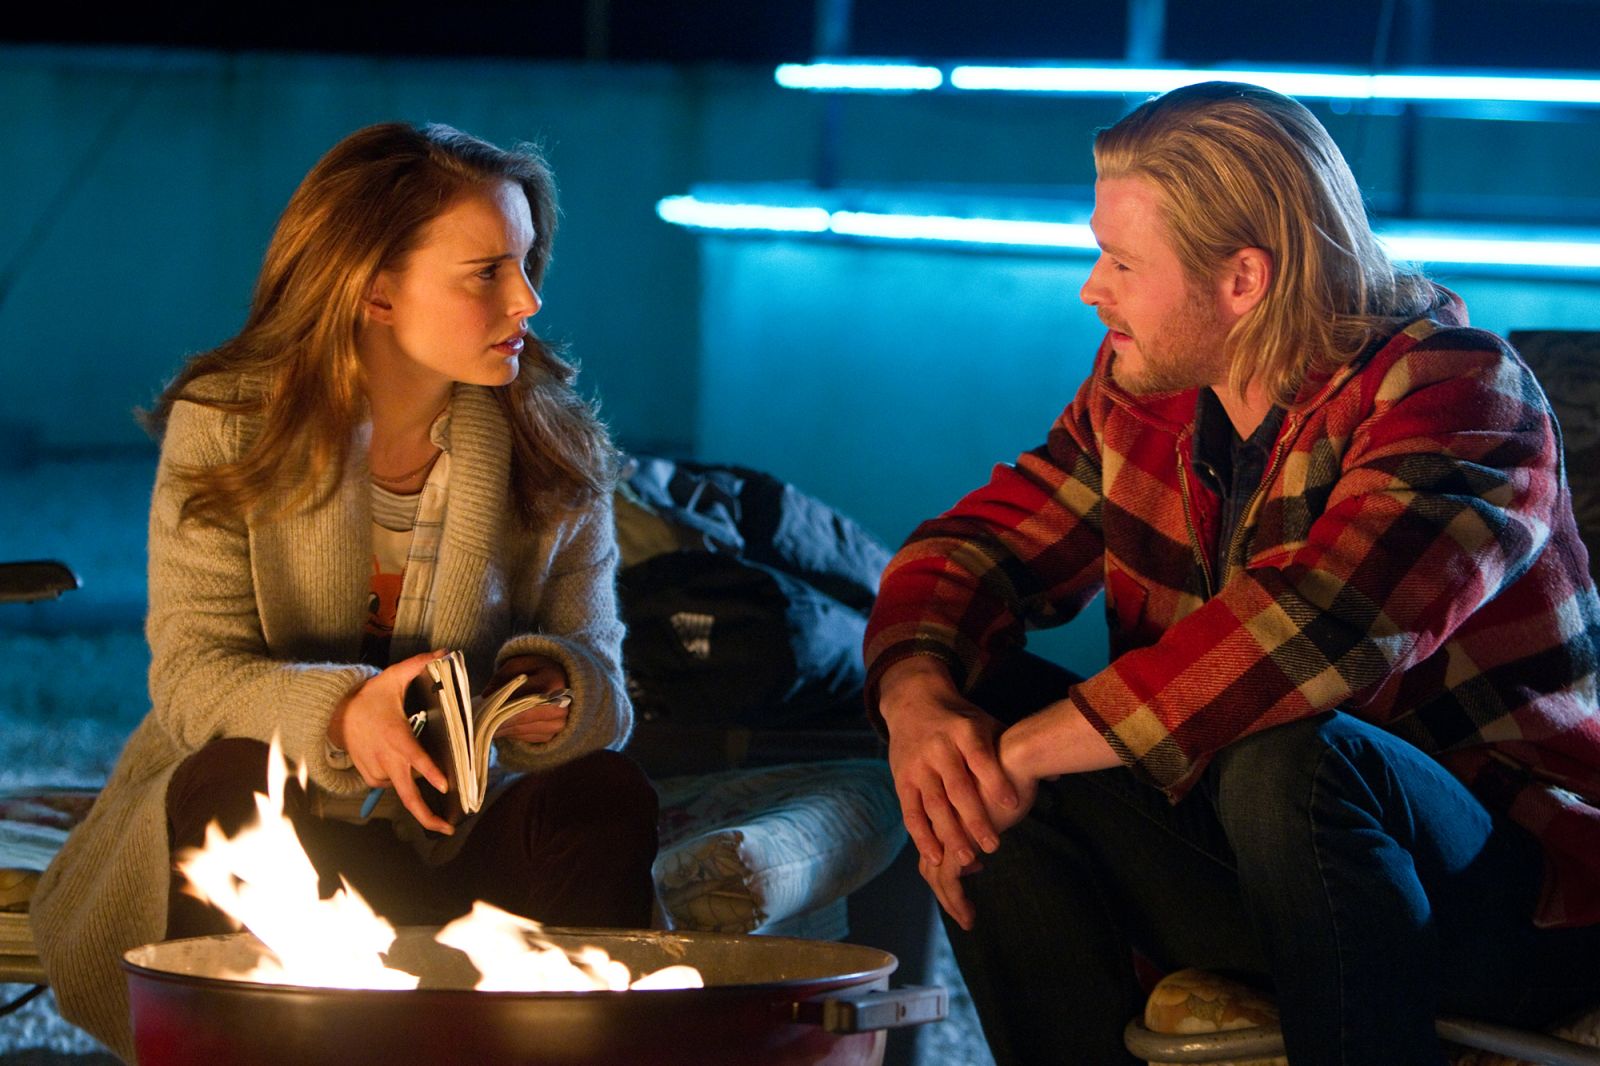 Thor and Jane Foster on a heroic adventure together. The mighty Chris Hemsworth and Natalie Portman in action.